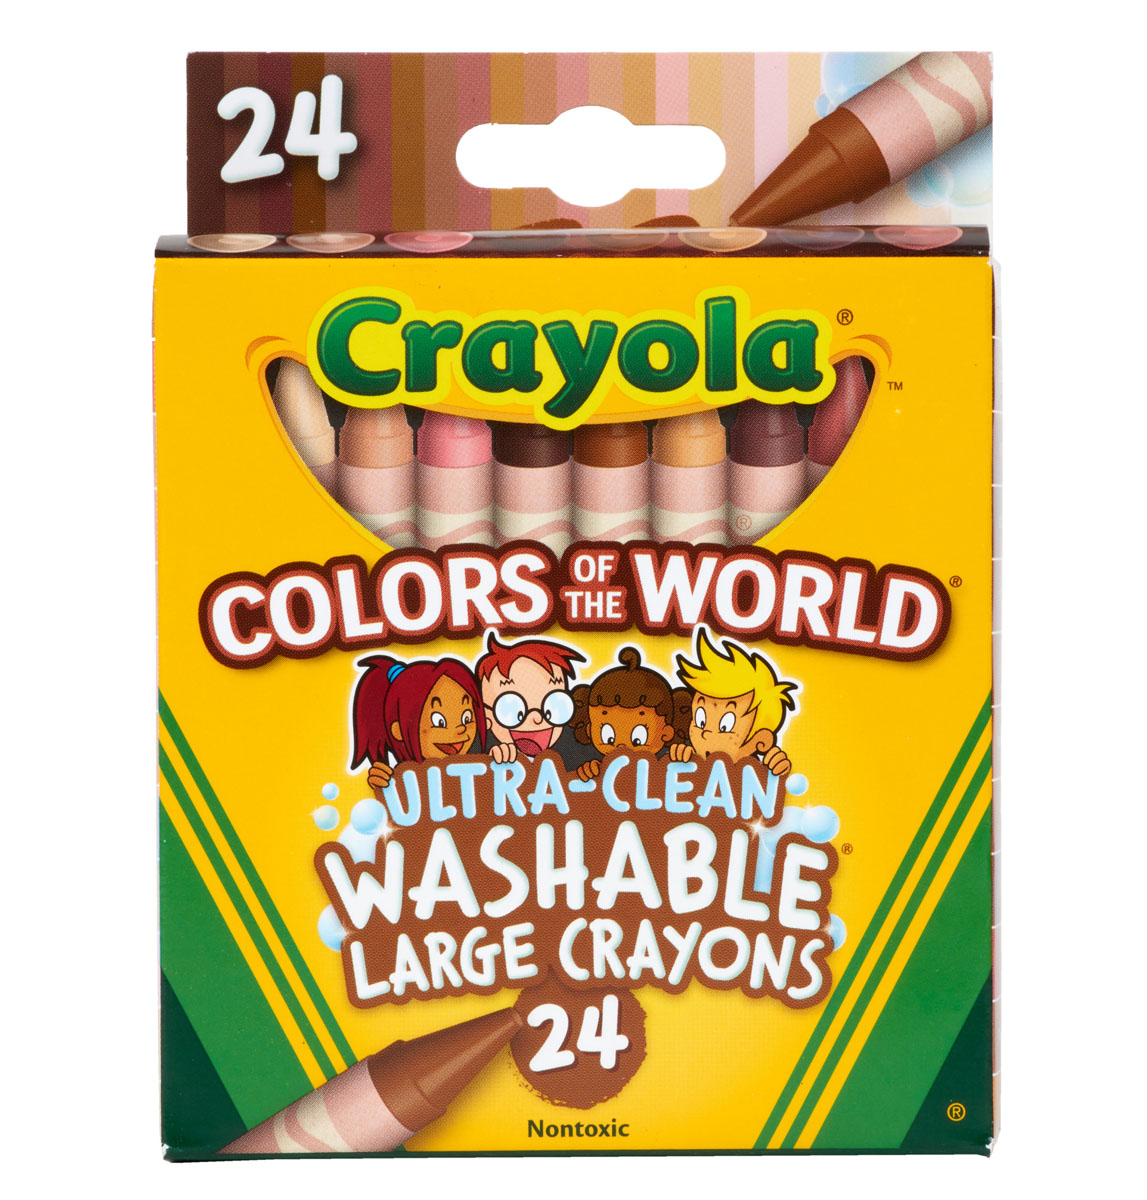 Crayola: Colors of the World on Vimeo